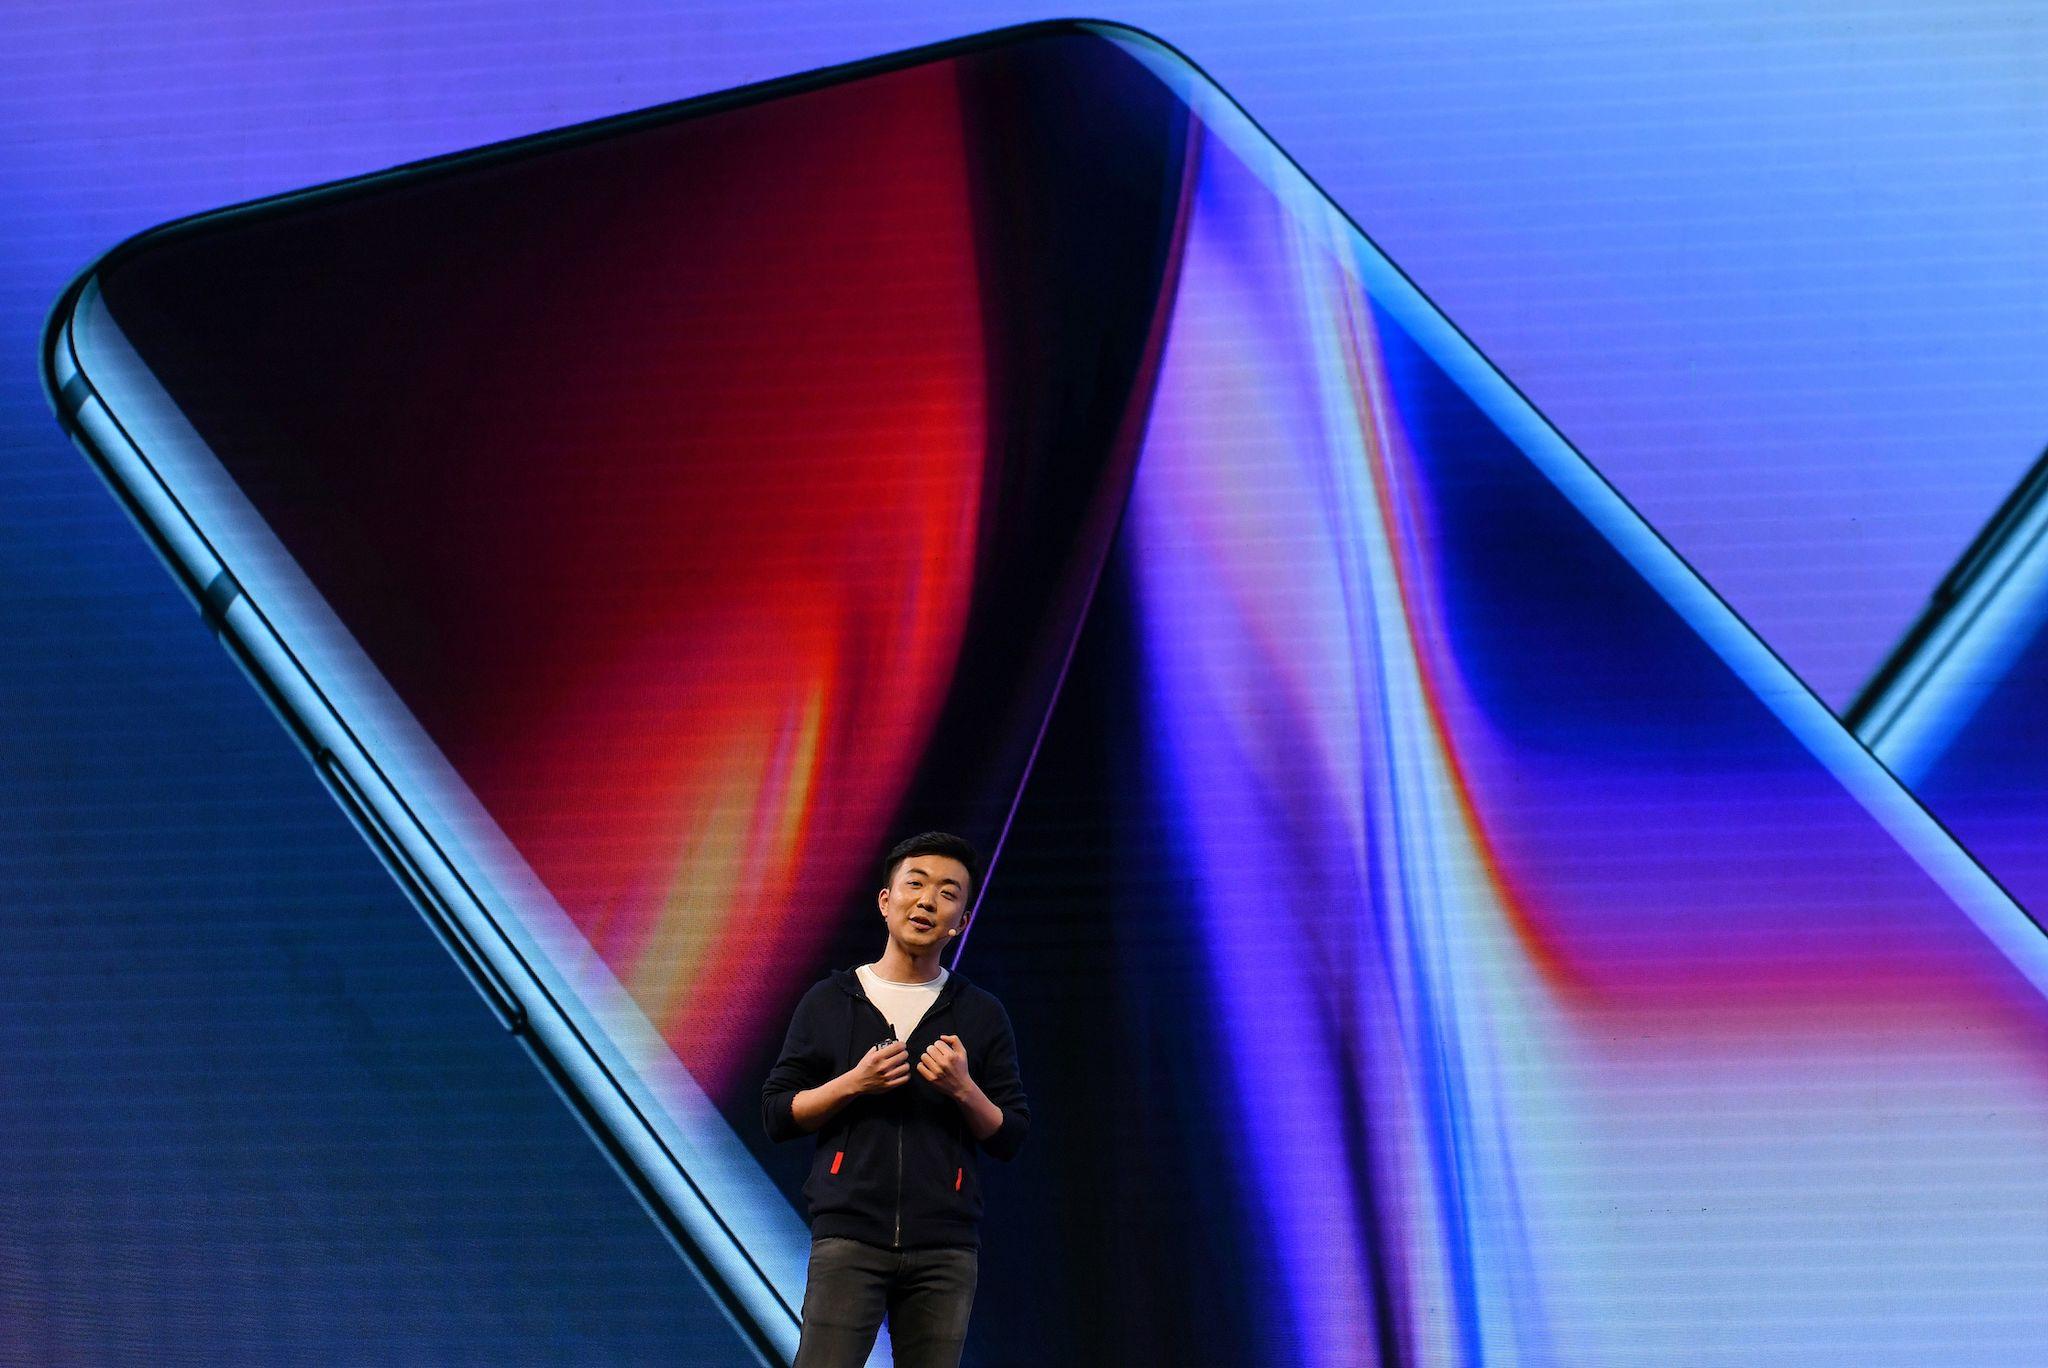 Co-founder and director of the Chinese smartphone maker OnePlus, Carl Pei gestures as he speaks on stage during the launch of their latest OnePlus 7 and the OnePlus 7 Pro